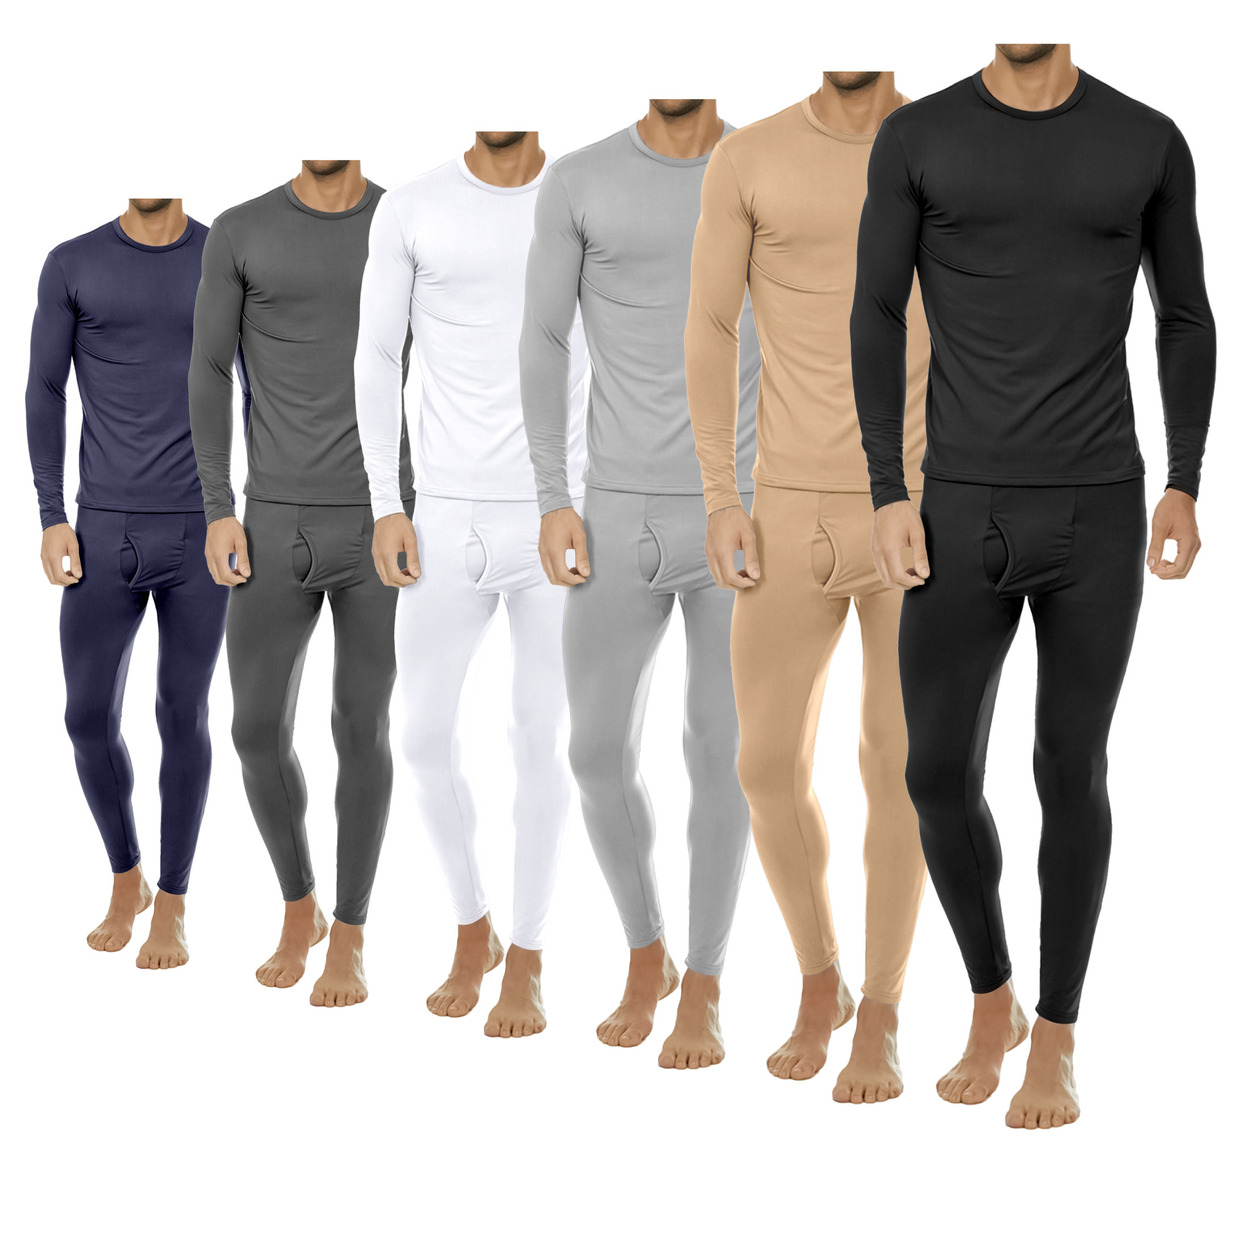 2-Sets: Men's Winter Warm Fleece Lined Thermal Underwear Set For Cold Weather - Grey&grey, Xx-large